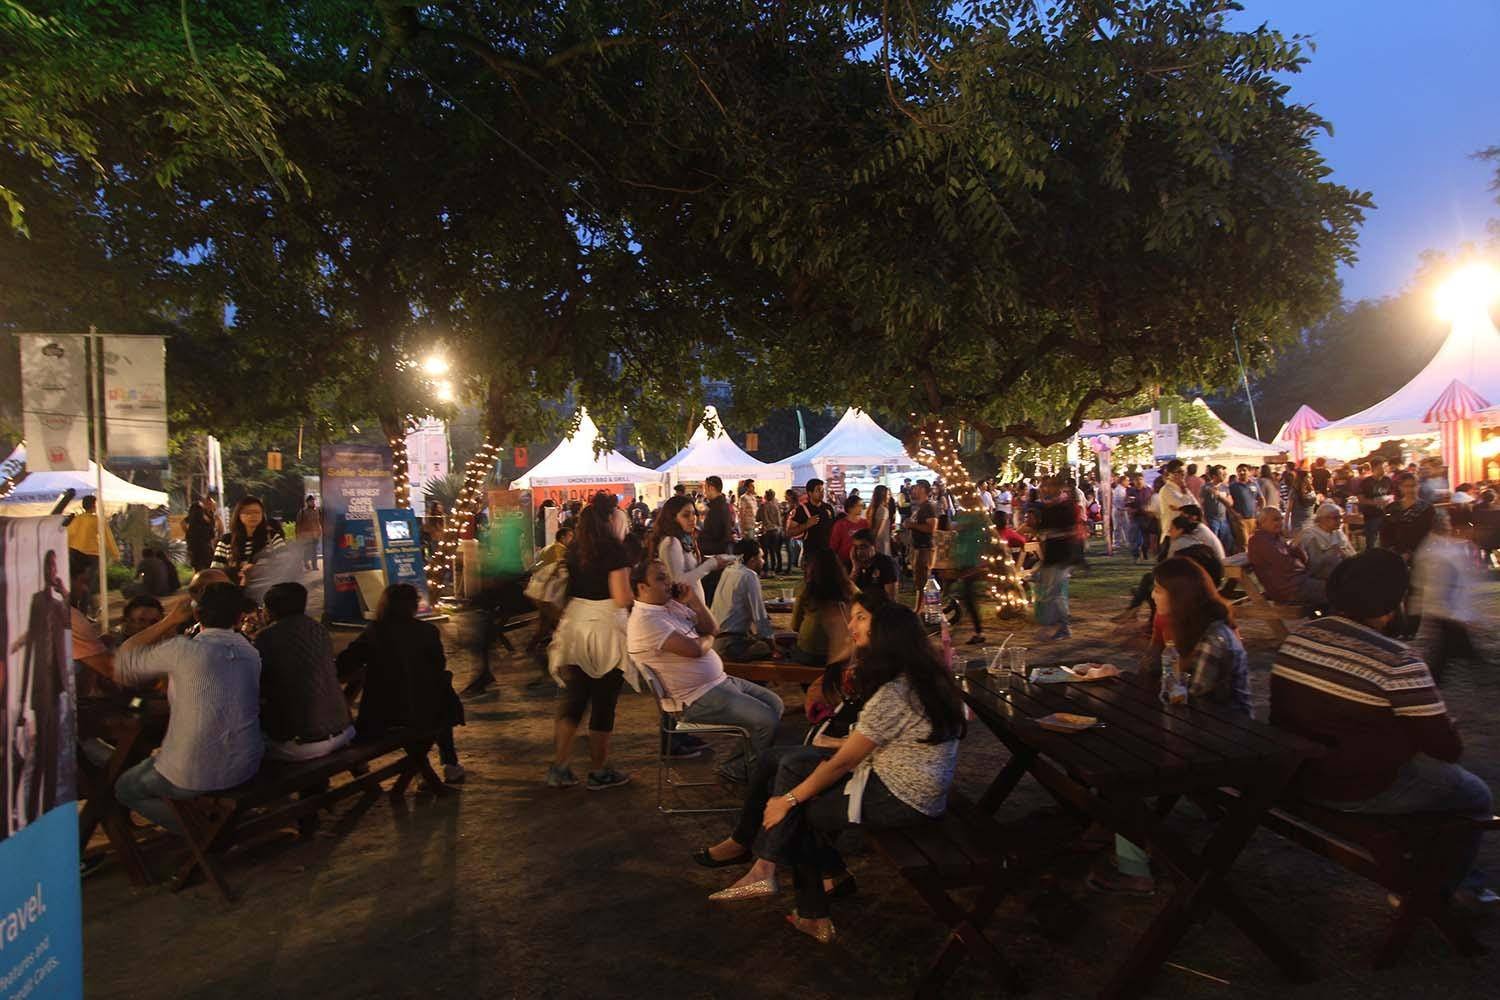 Clear Your Calendars, Here Is A List Of All The Food Festivals Coming To Town!